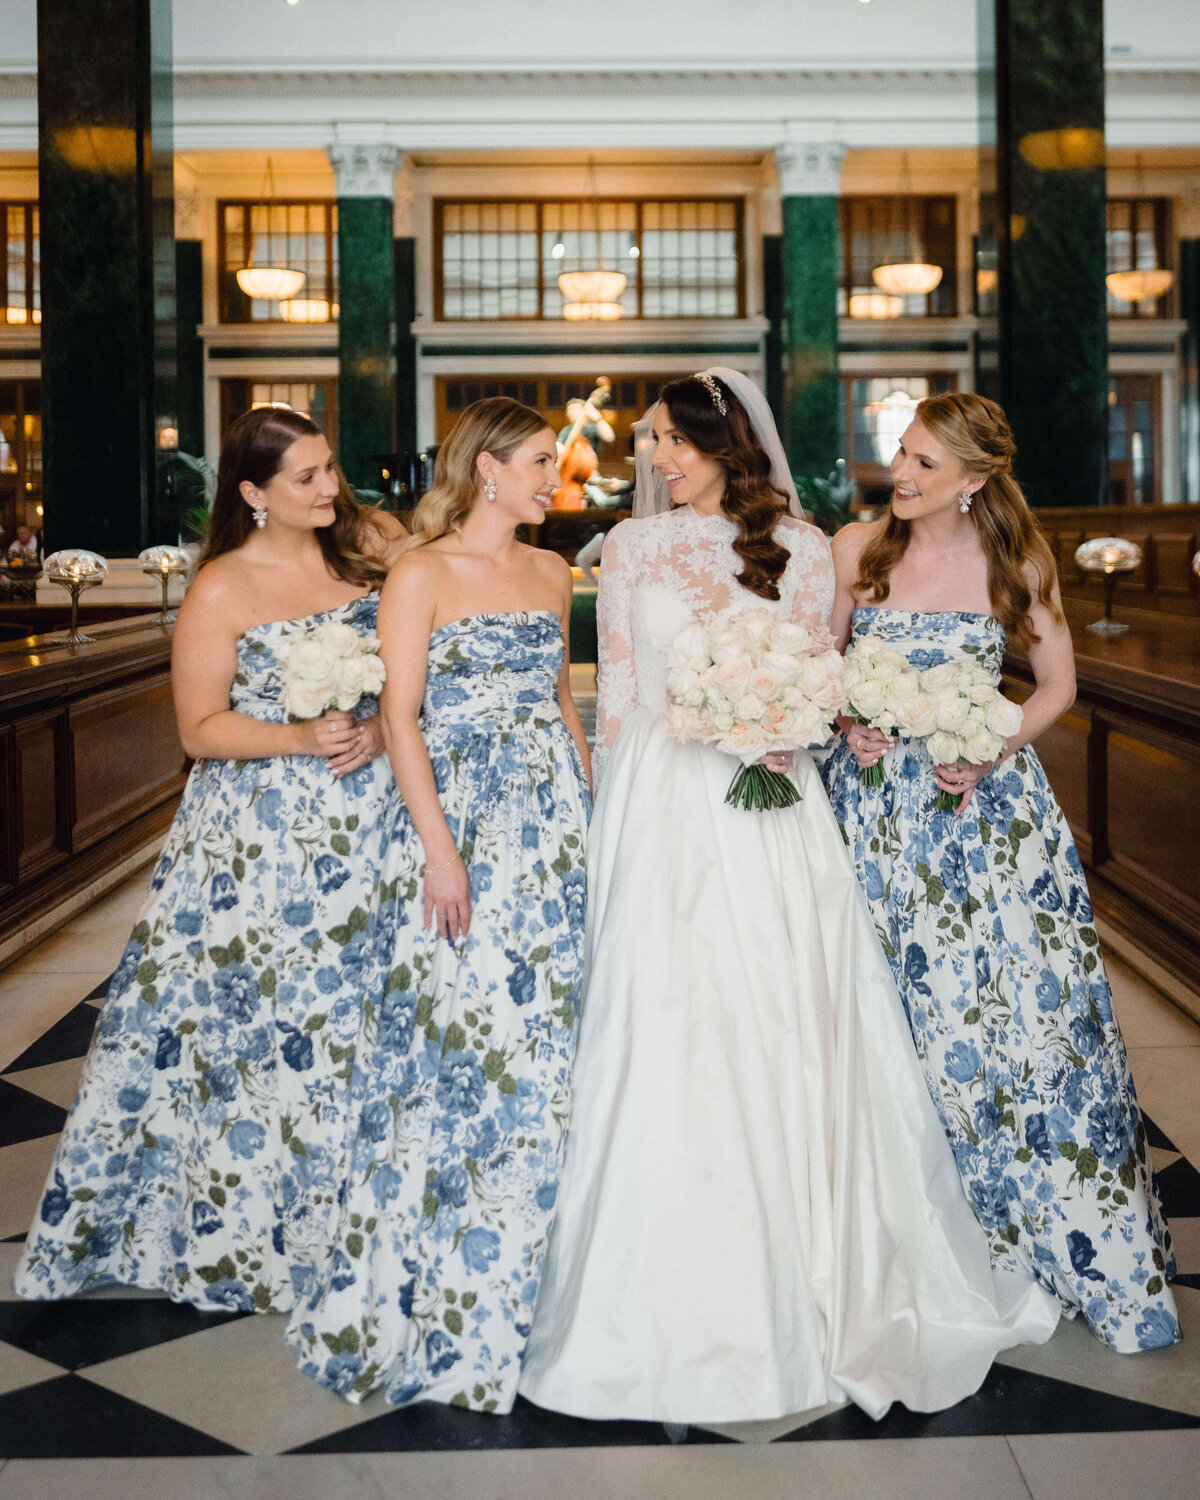 bride walking through the lobby of the ned london with her bridesmaids who all wear blue and green patterned dresses for this chic city wedding